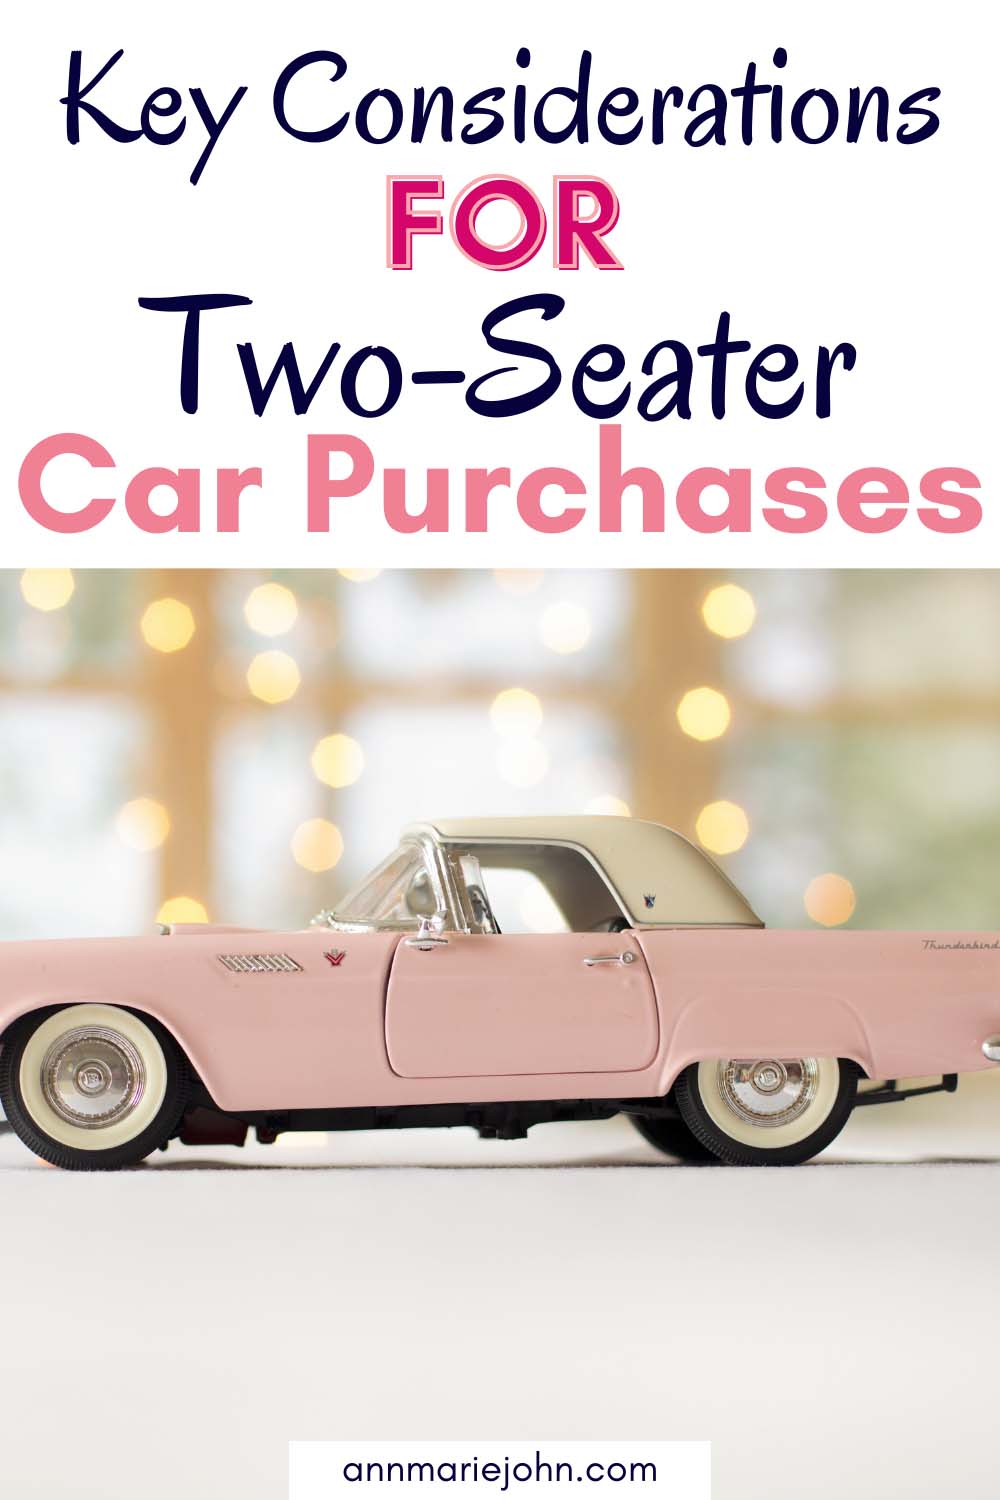 Key Considerations for Two-Seater Car Purchases